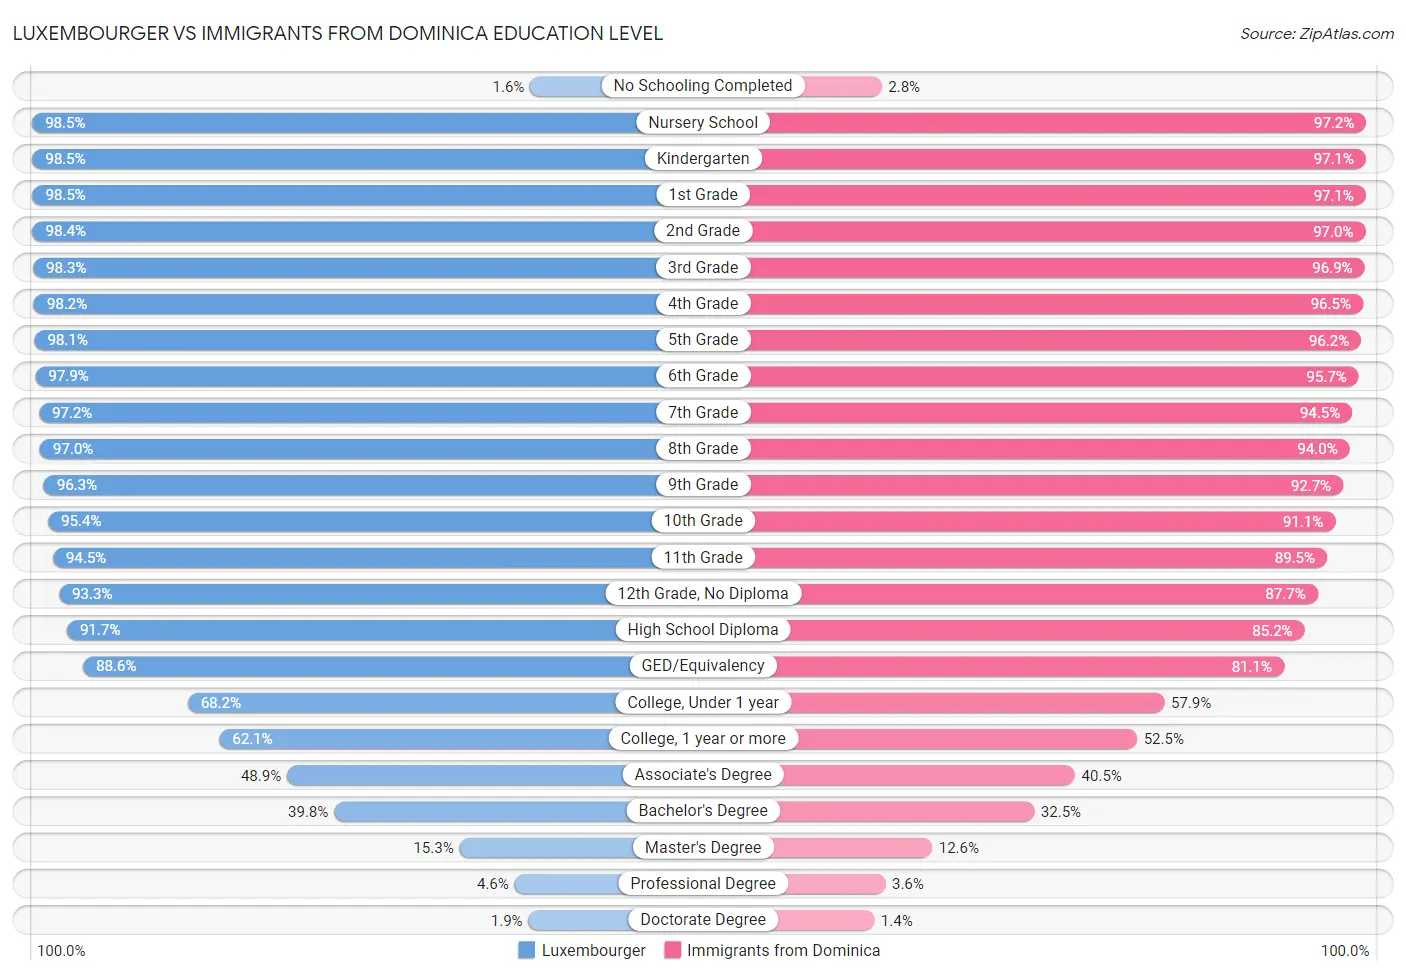 Luxembourger vs Immigrants from Dominica Education Level